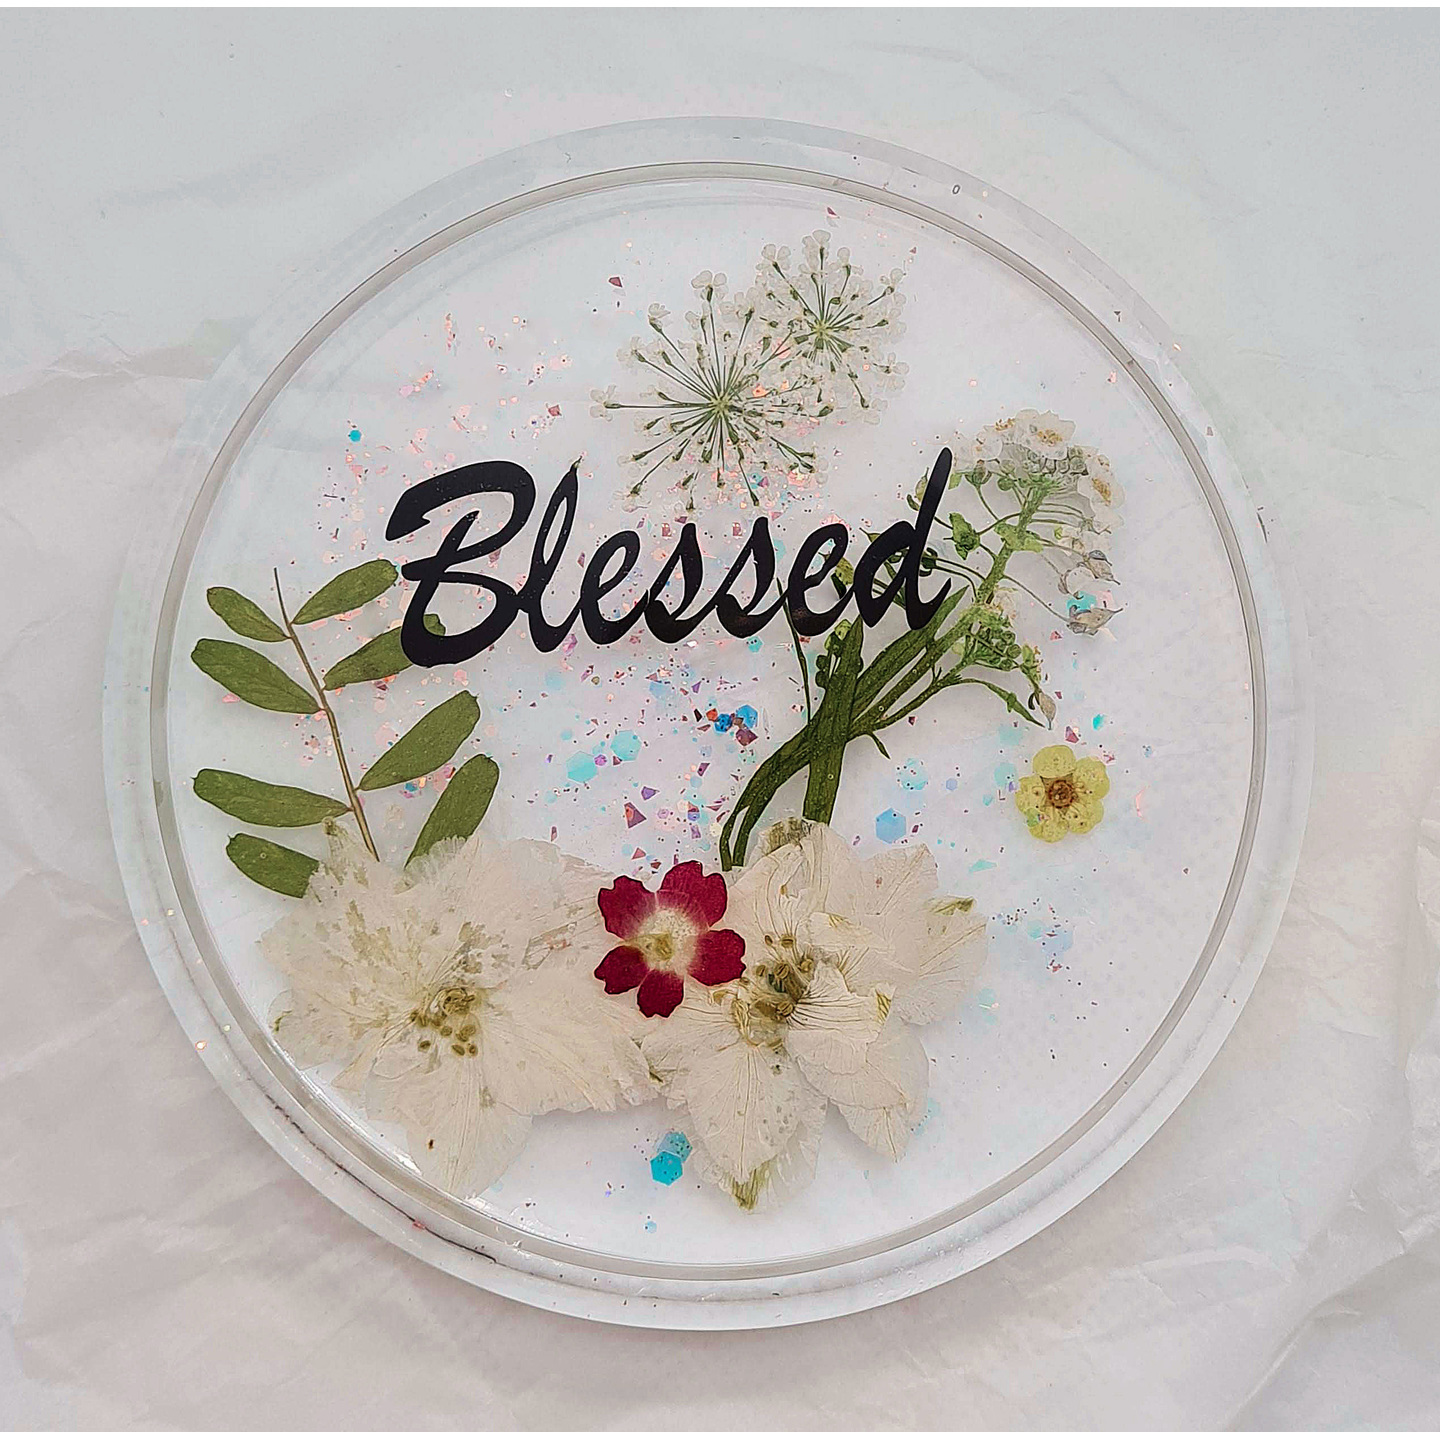 Blessed   Real Pressed Flowers & Leaves Resin Coaster with an inspirational word Handmade